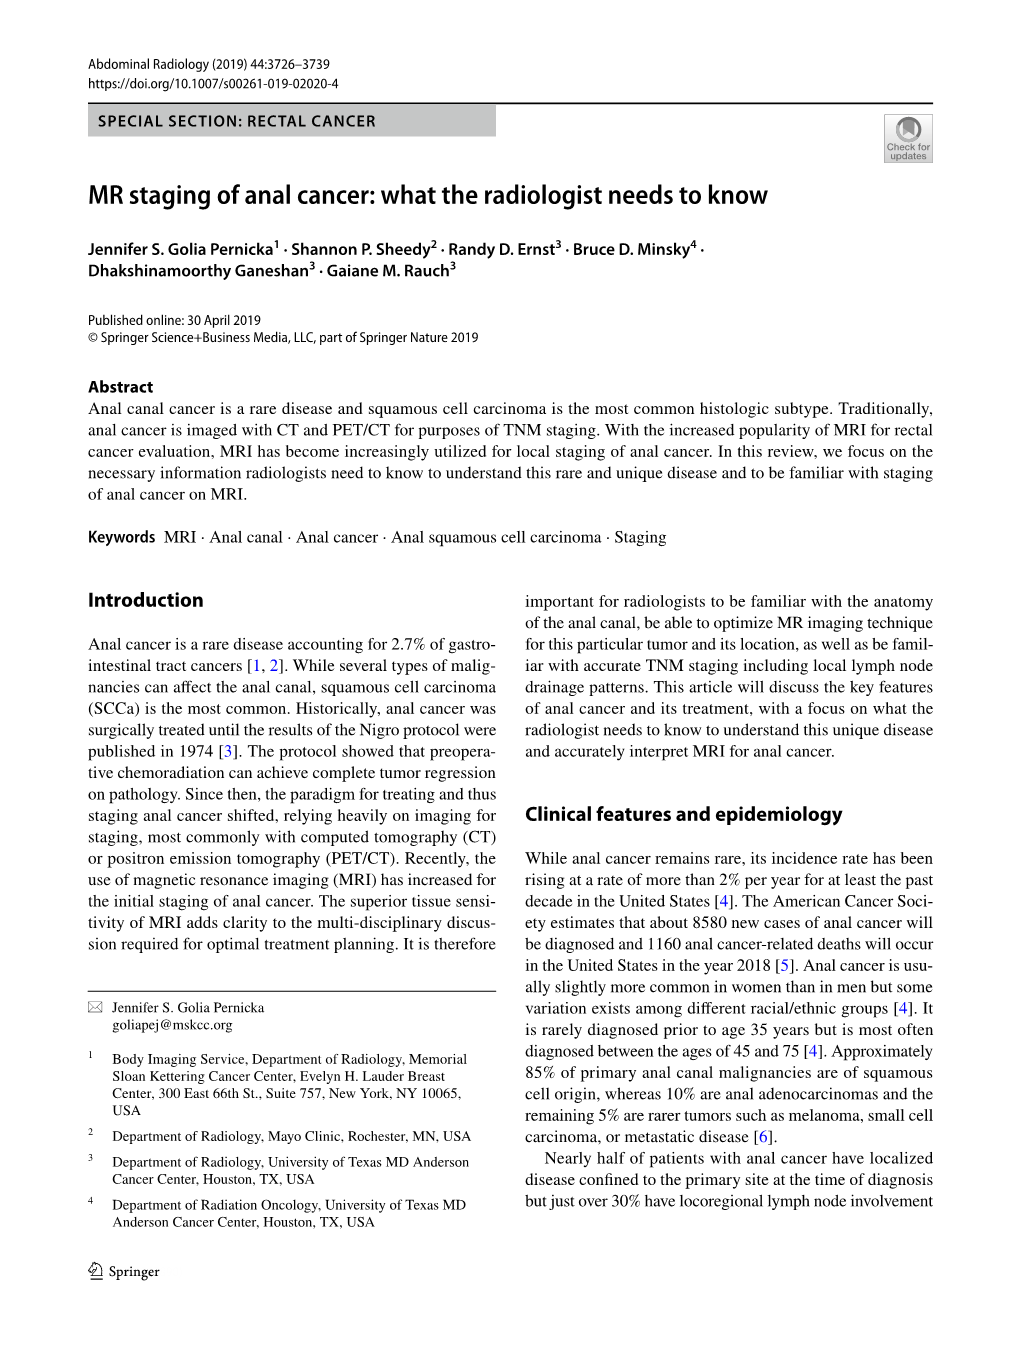 MR Staging of Anal Cancer: What the Radiologist Needs to Know